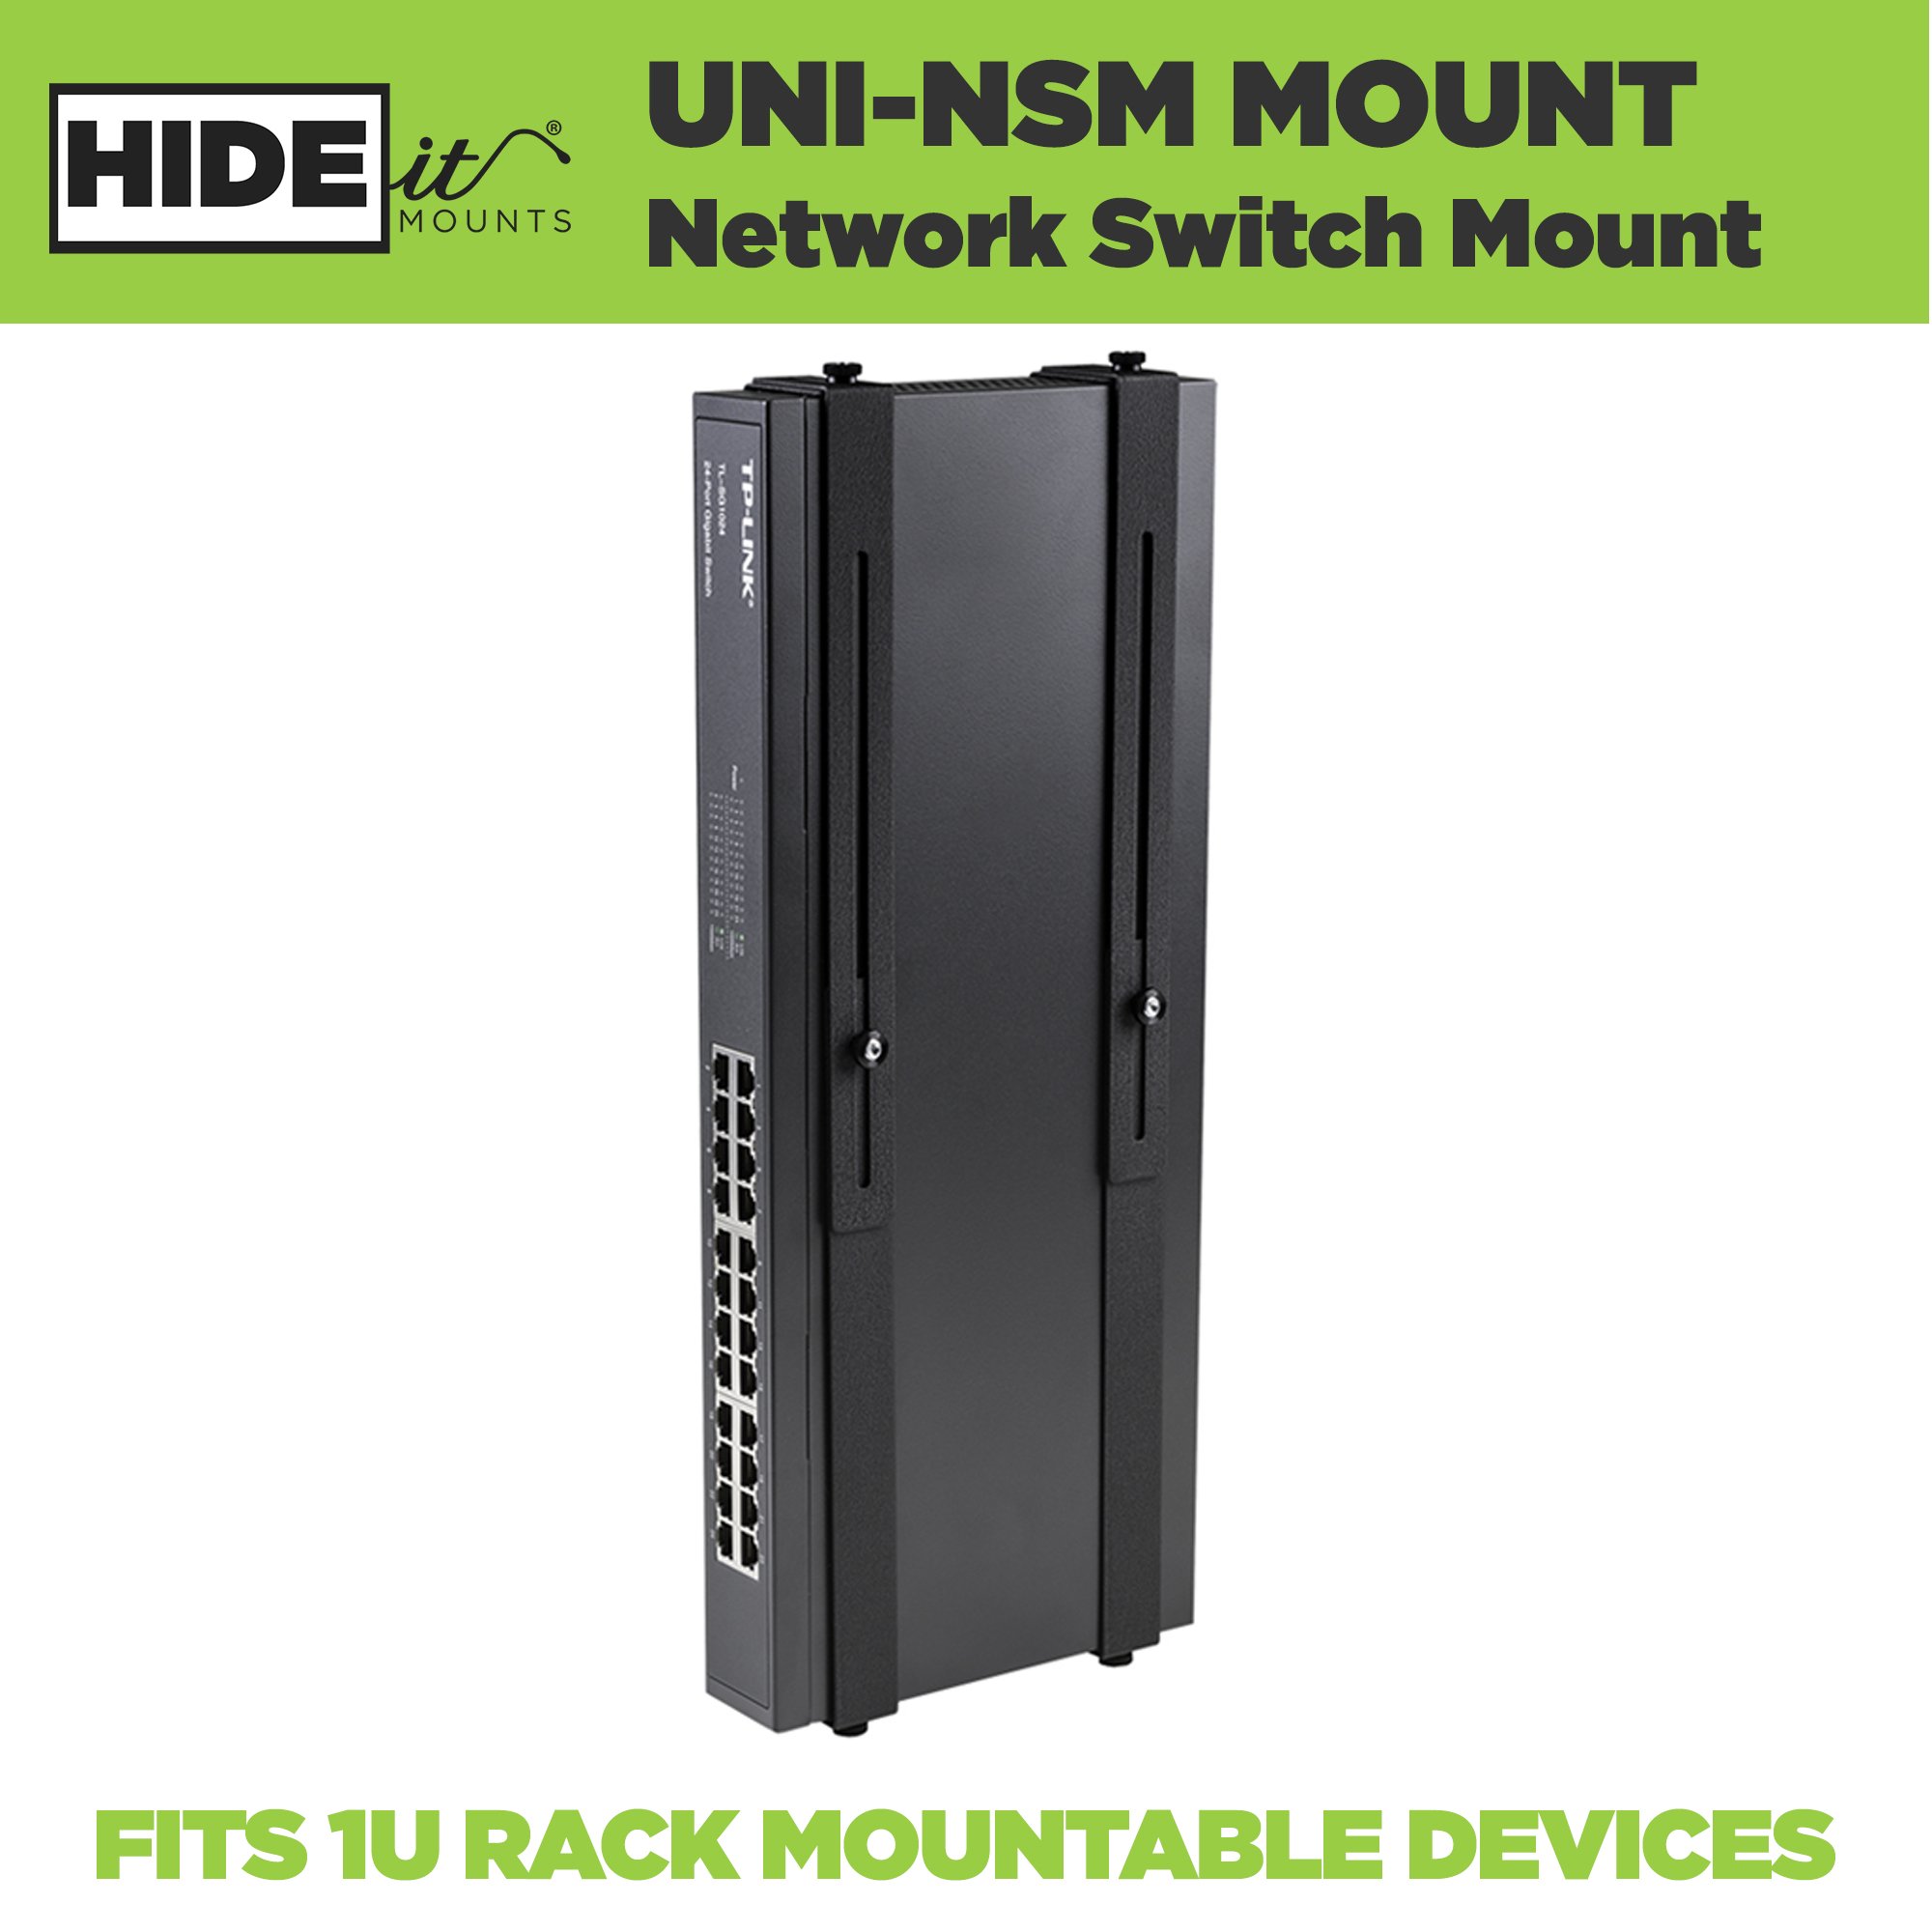 HIDEit Mounts Uni-NSM Adjustable Network Switch Mount for Networking Devices (Black) - image 4 of 6